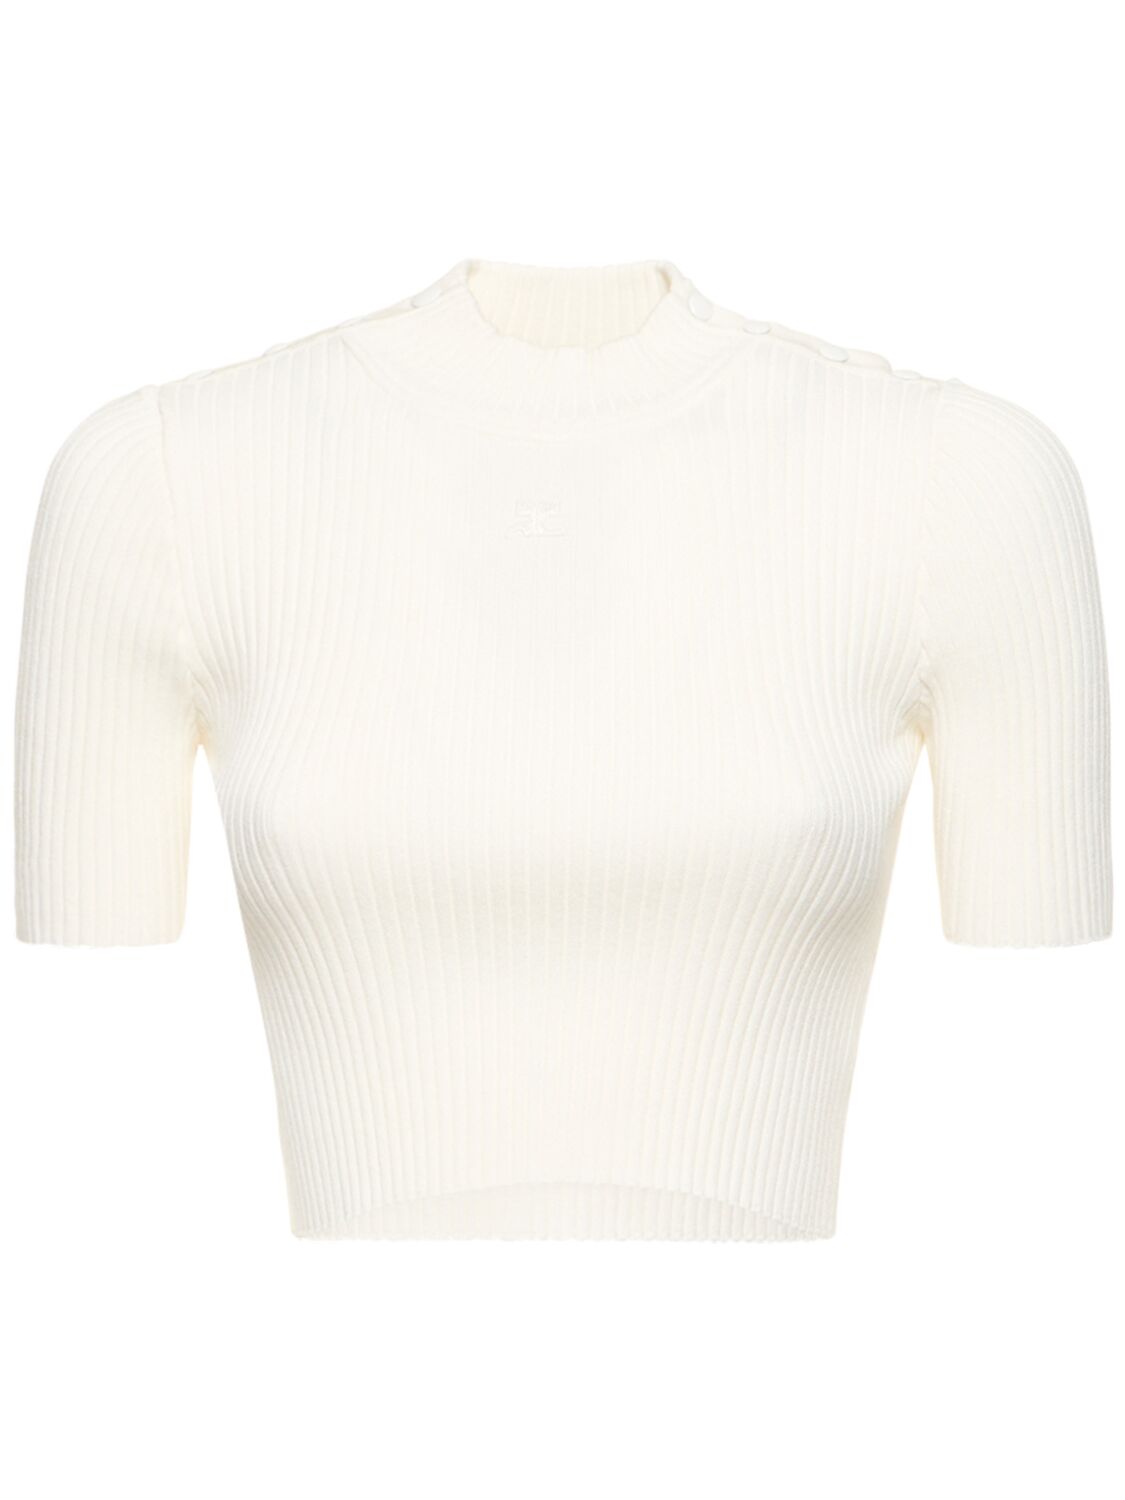 Image of Shoulder Snaps Rib Knit Crop Sweater